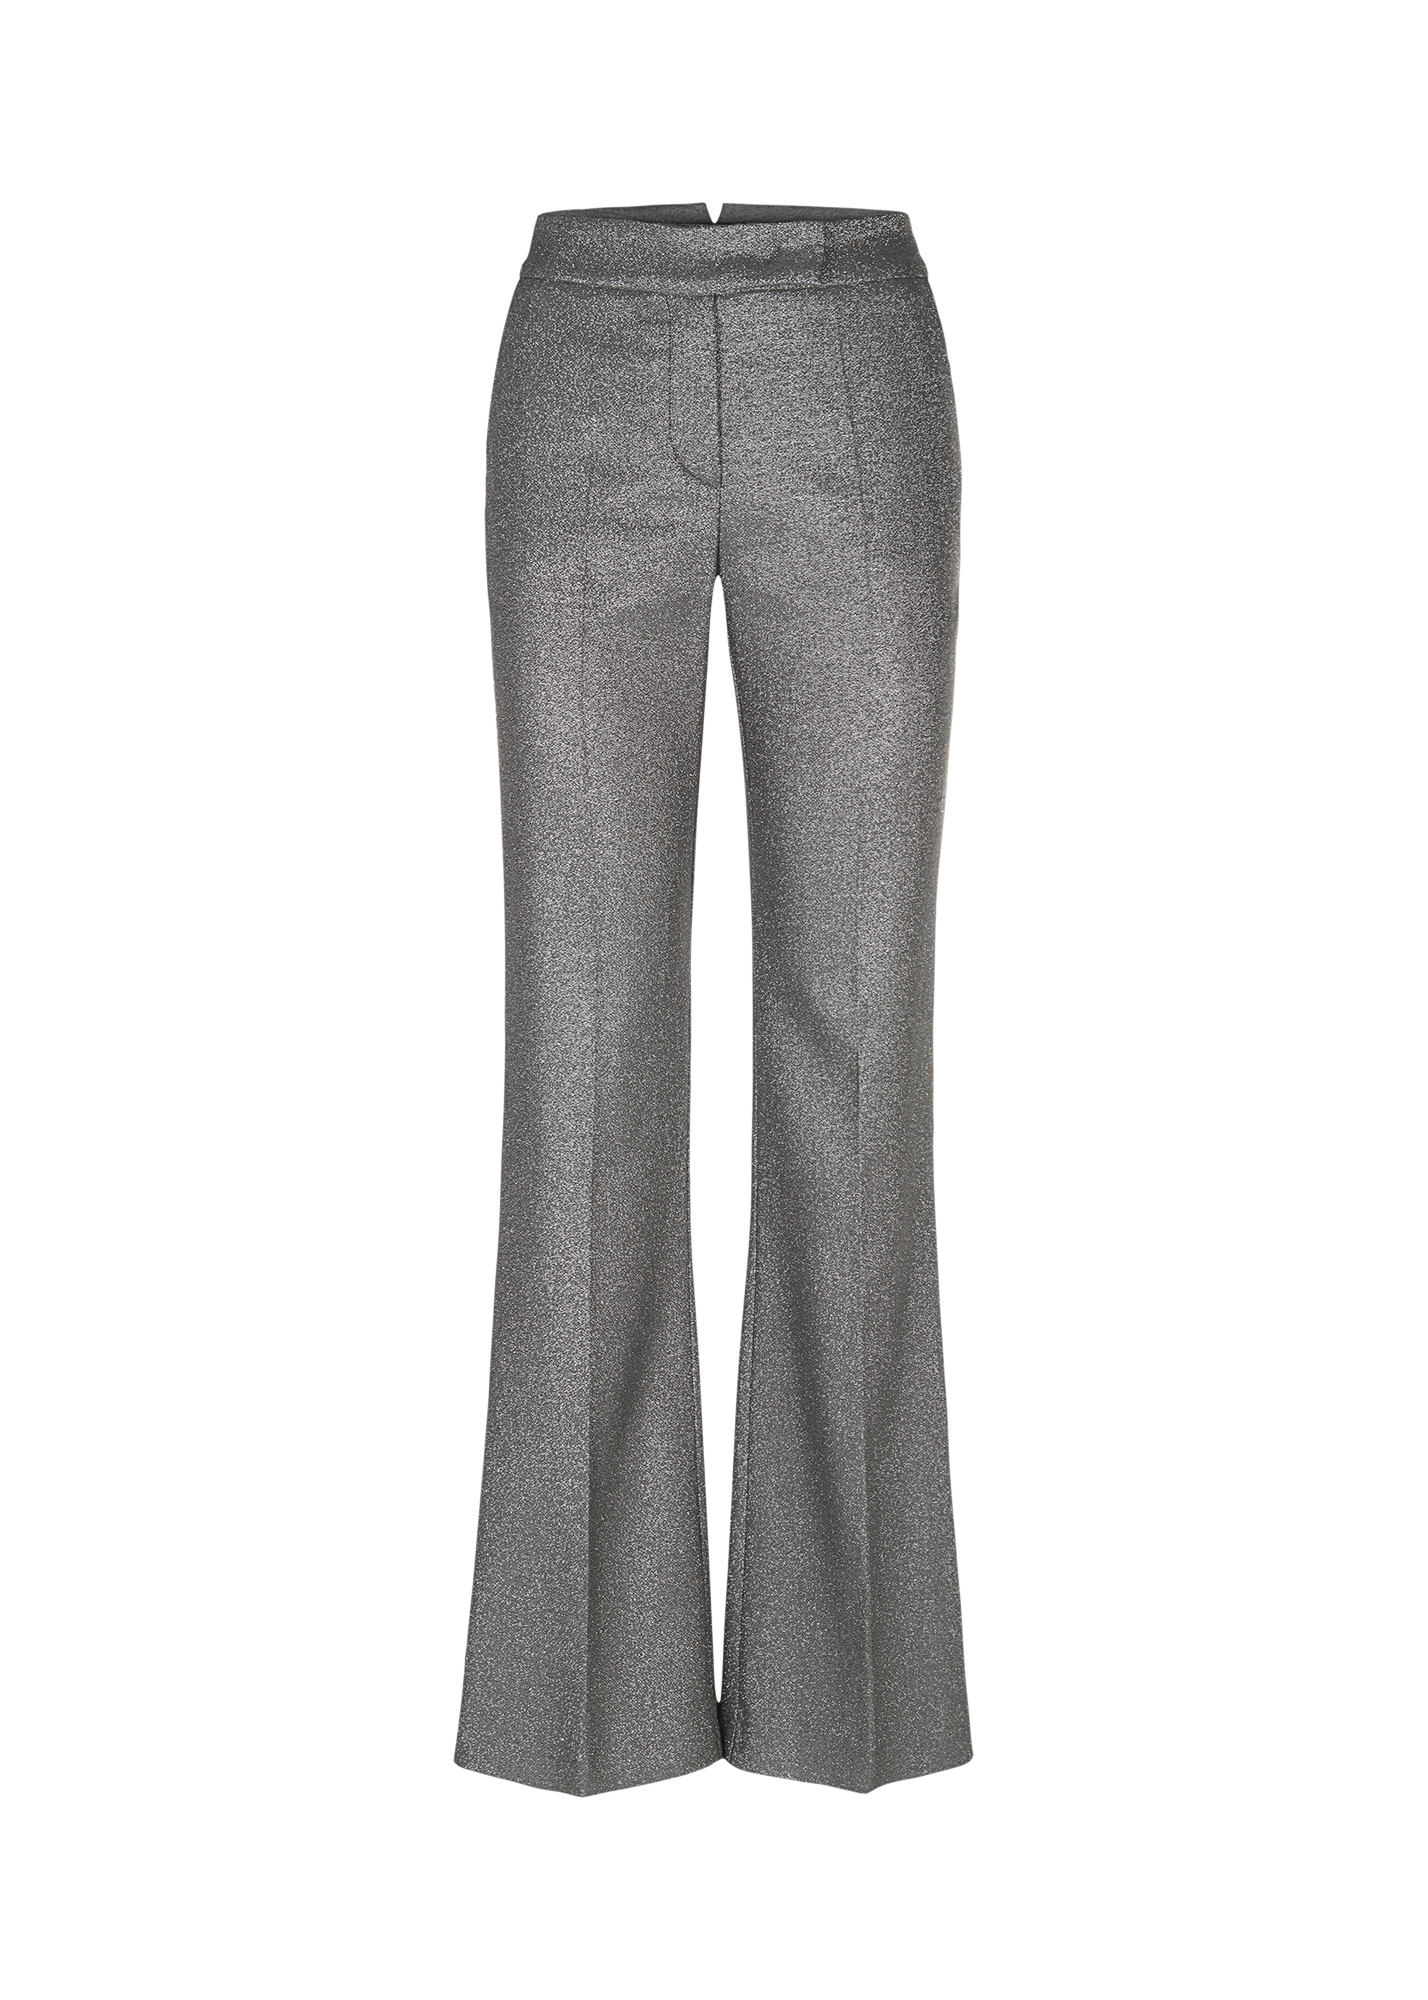 RIANI-OUTLET-SALE-Hose-slim-fit-bootcut-Hosen-ARCHIVE-COLLECTION_5a781435-7f99-4503-9bd3-faaeaeb3cb19.png